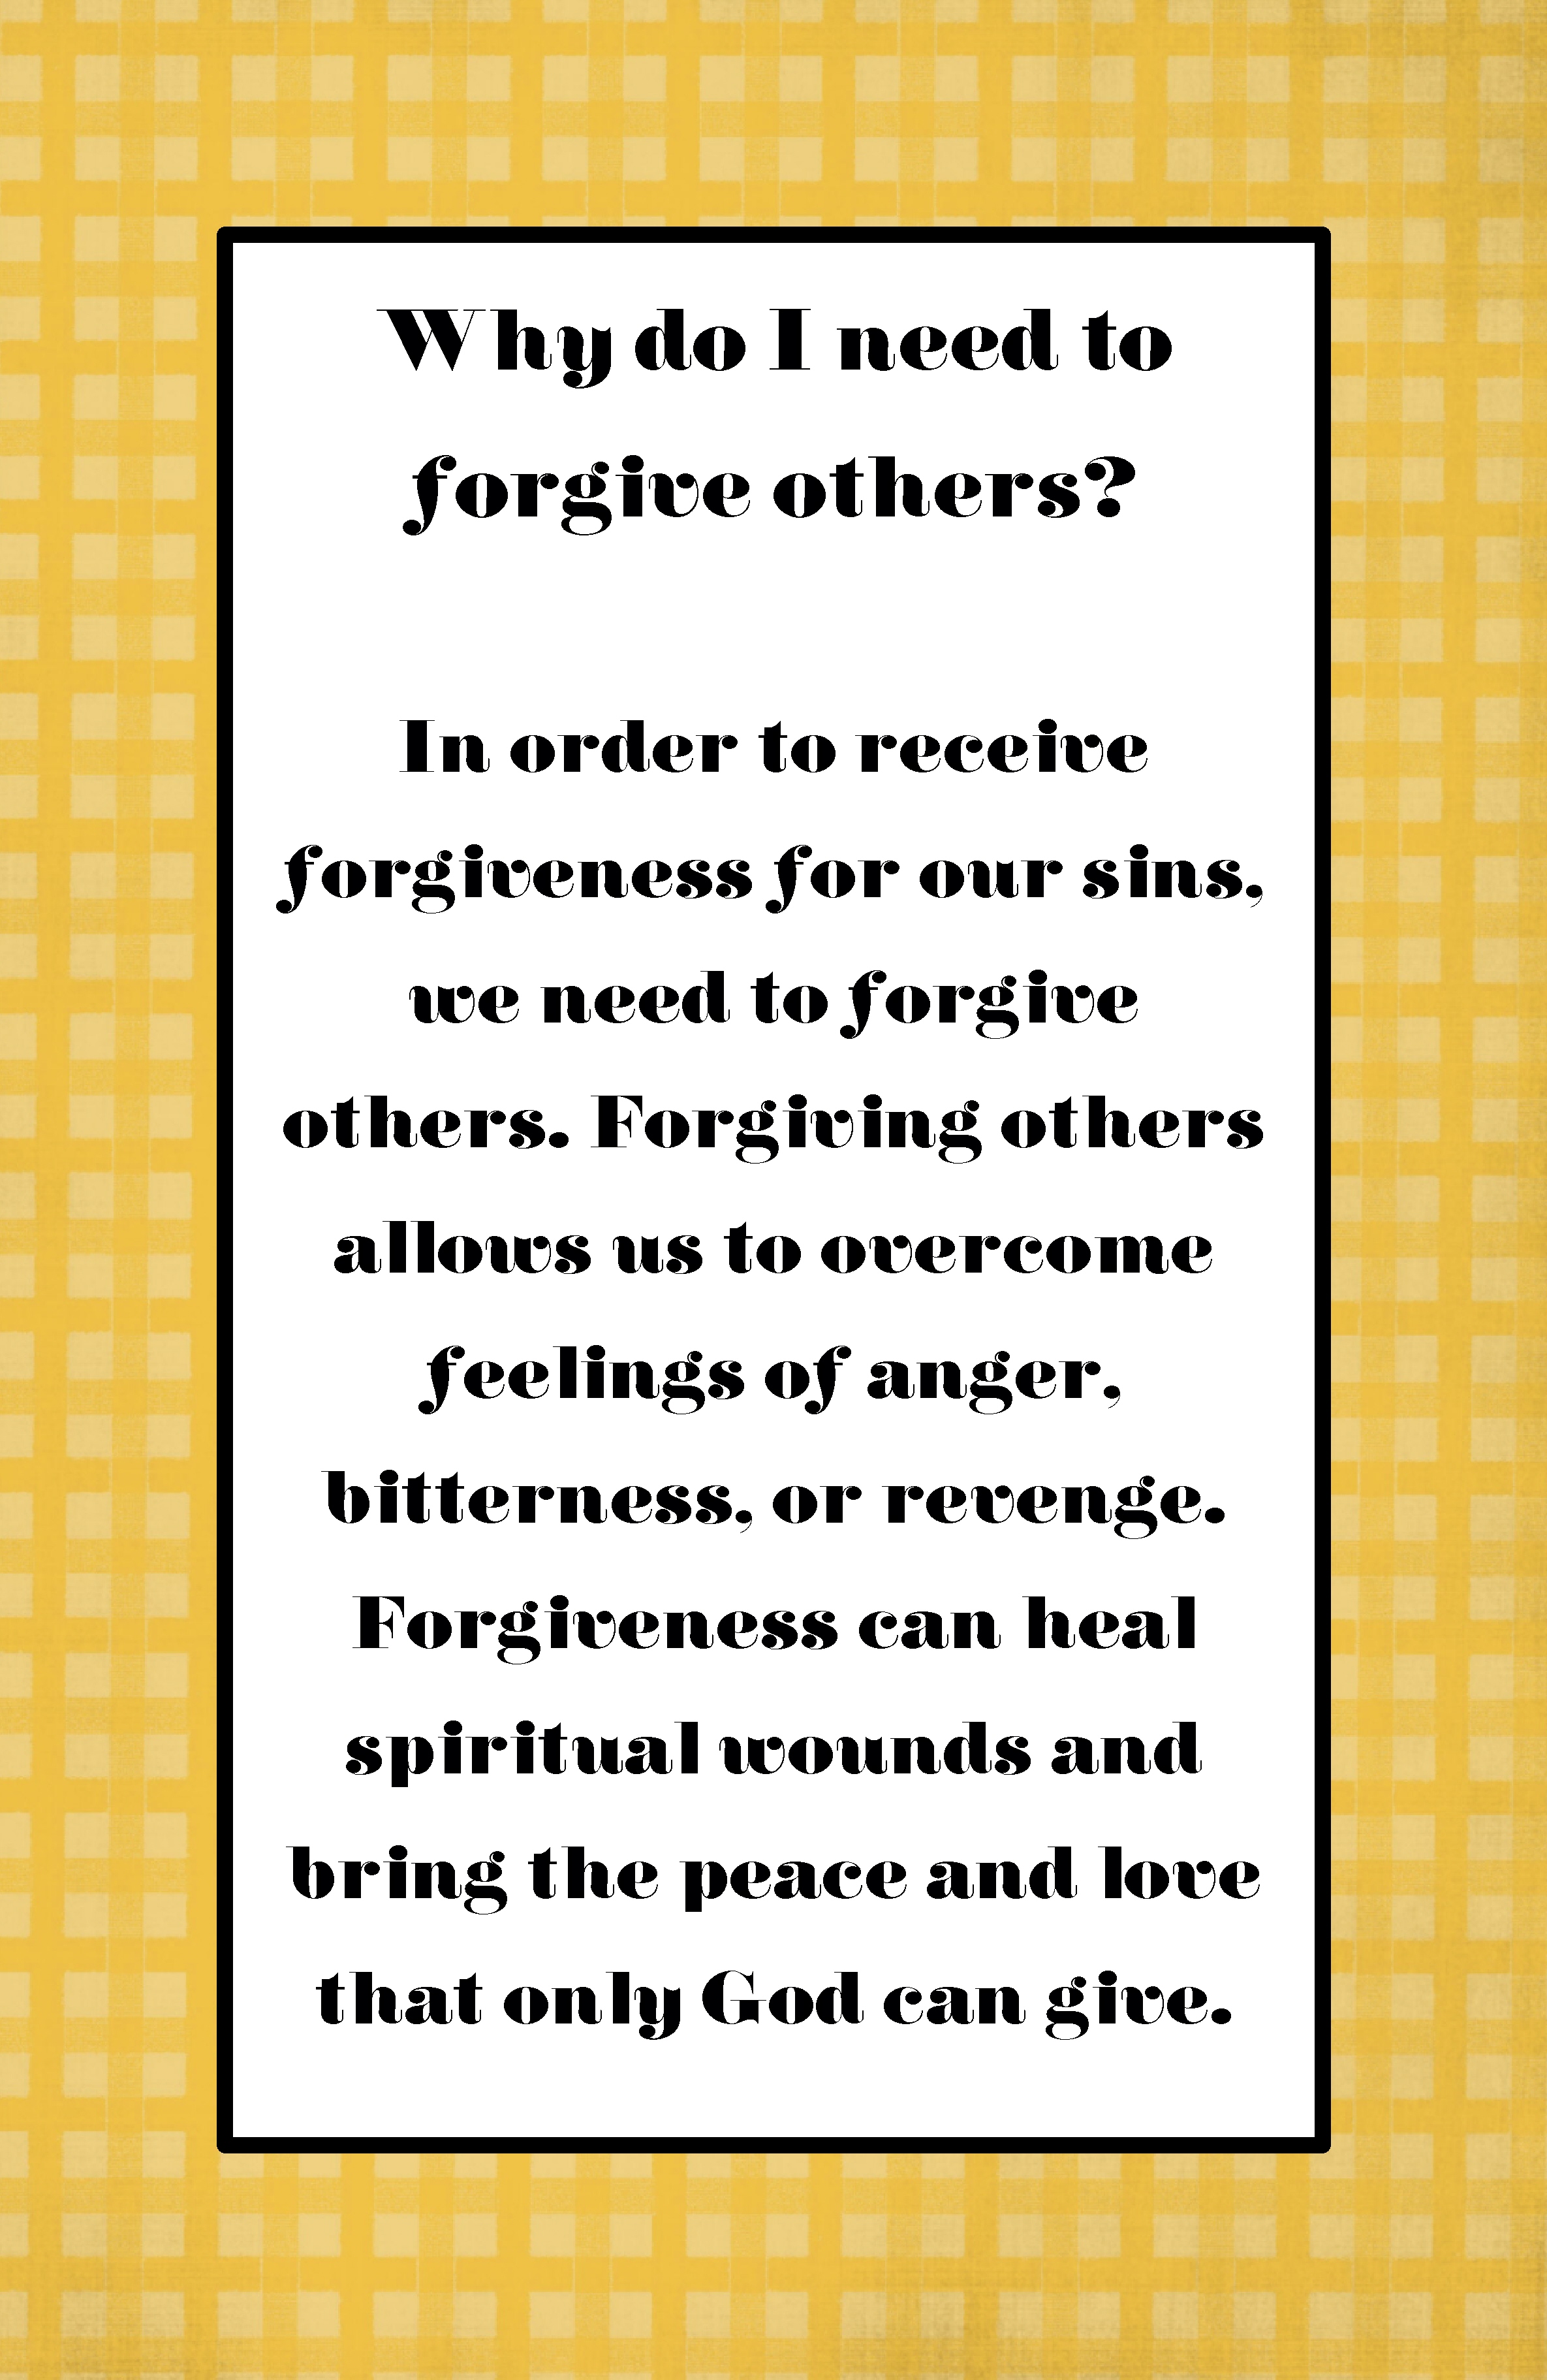 Why Do I Need To Forgive Others Young Women/'s Come Follow Me Lesson Plan helps